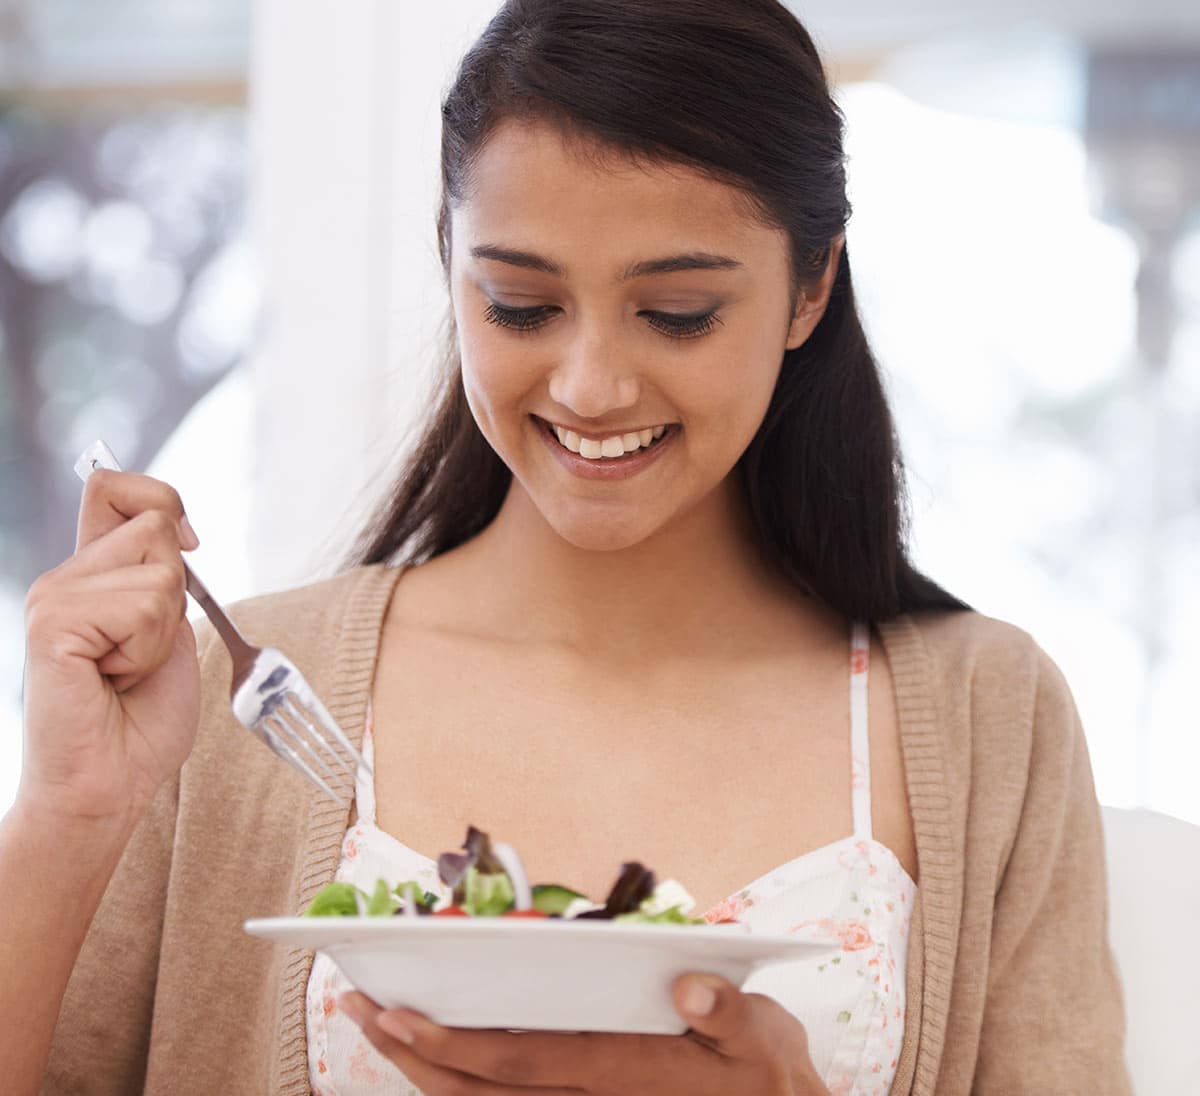 A woman eating a salad with a fork.